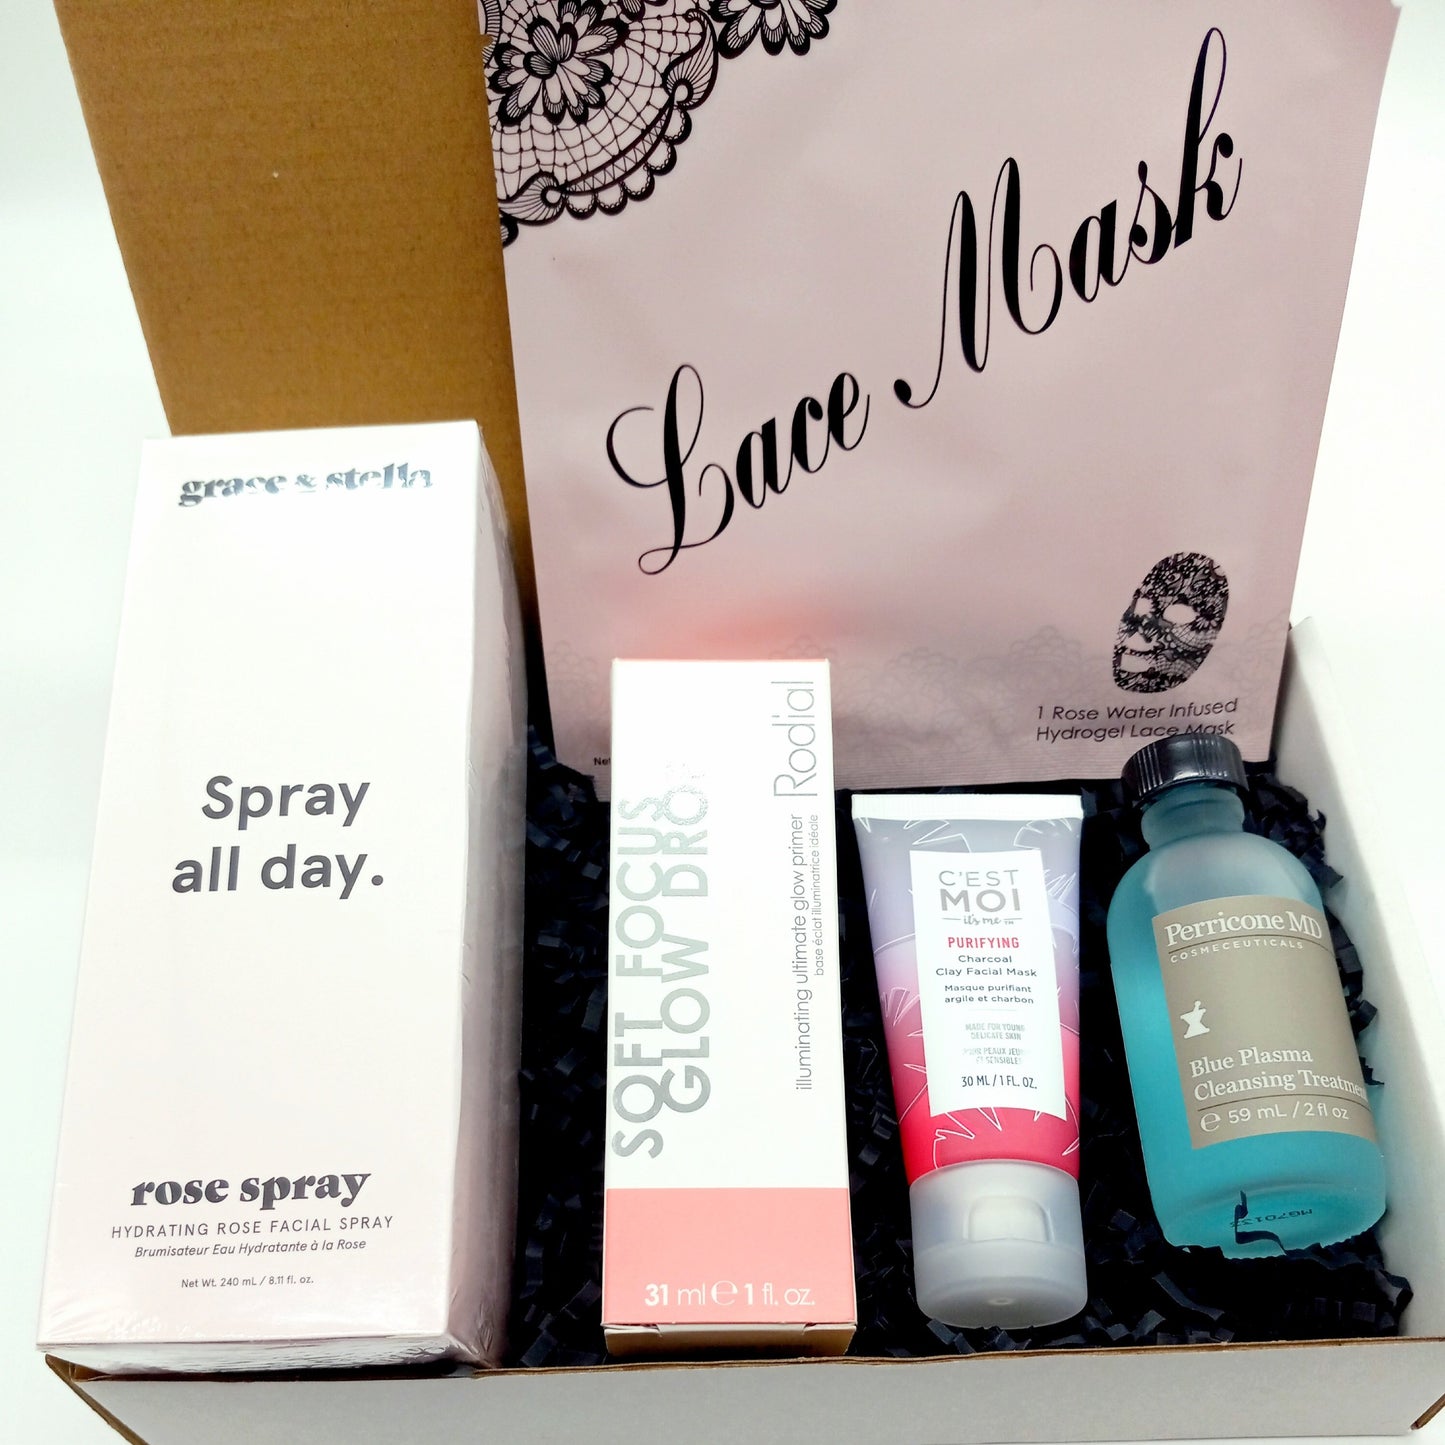 Our October Monthly Box Featuring the grace & stella spray all day rose facial spray along with 4 additional no related products